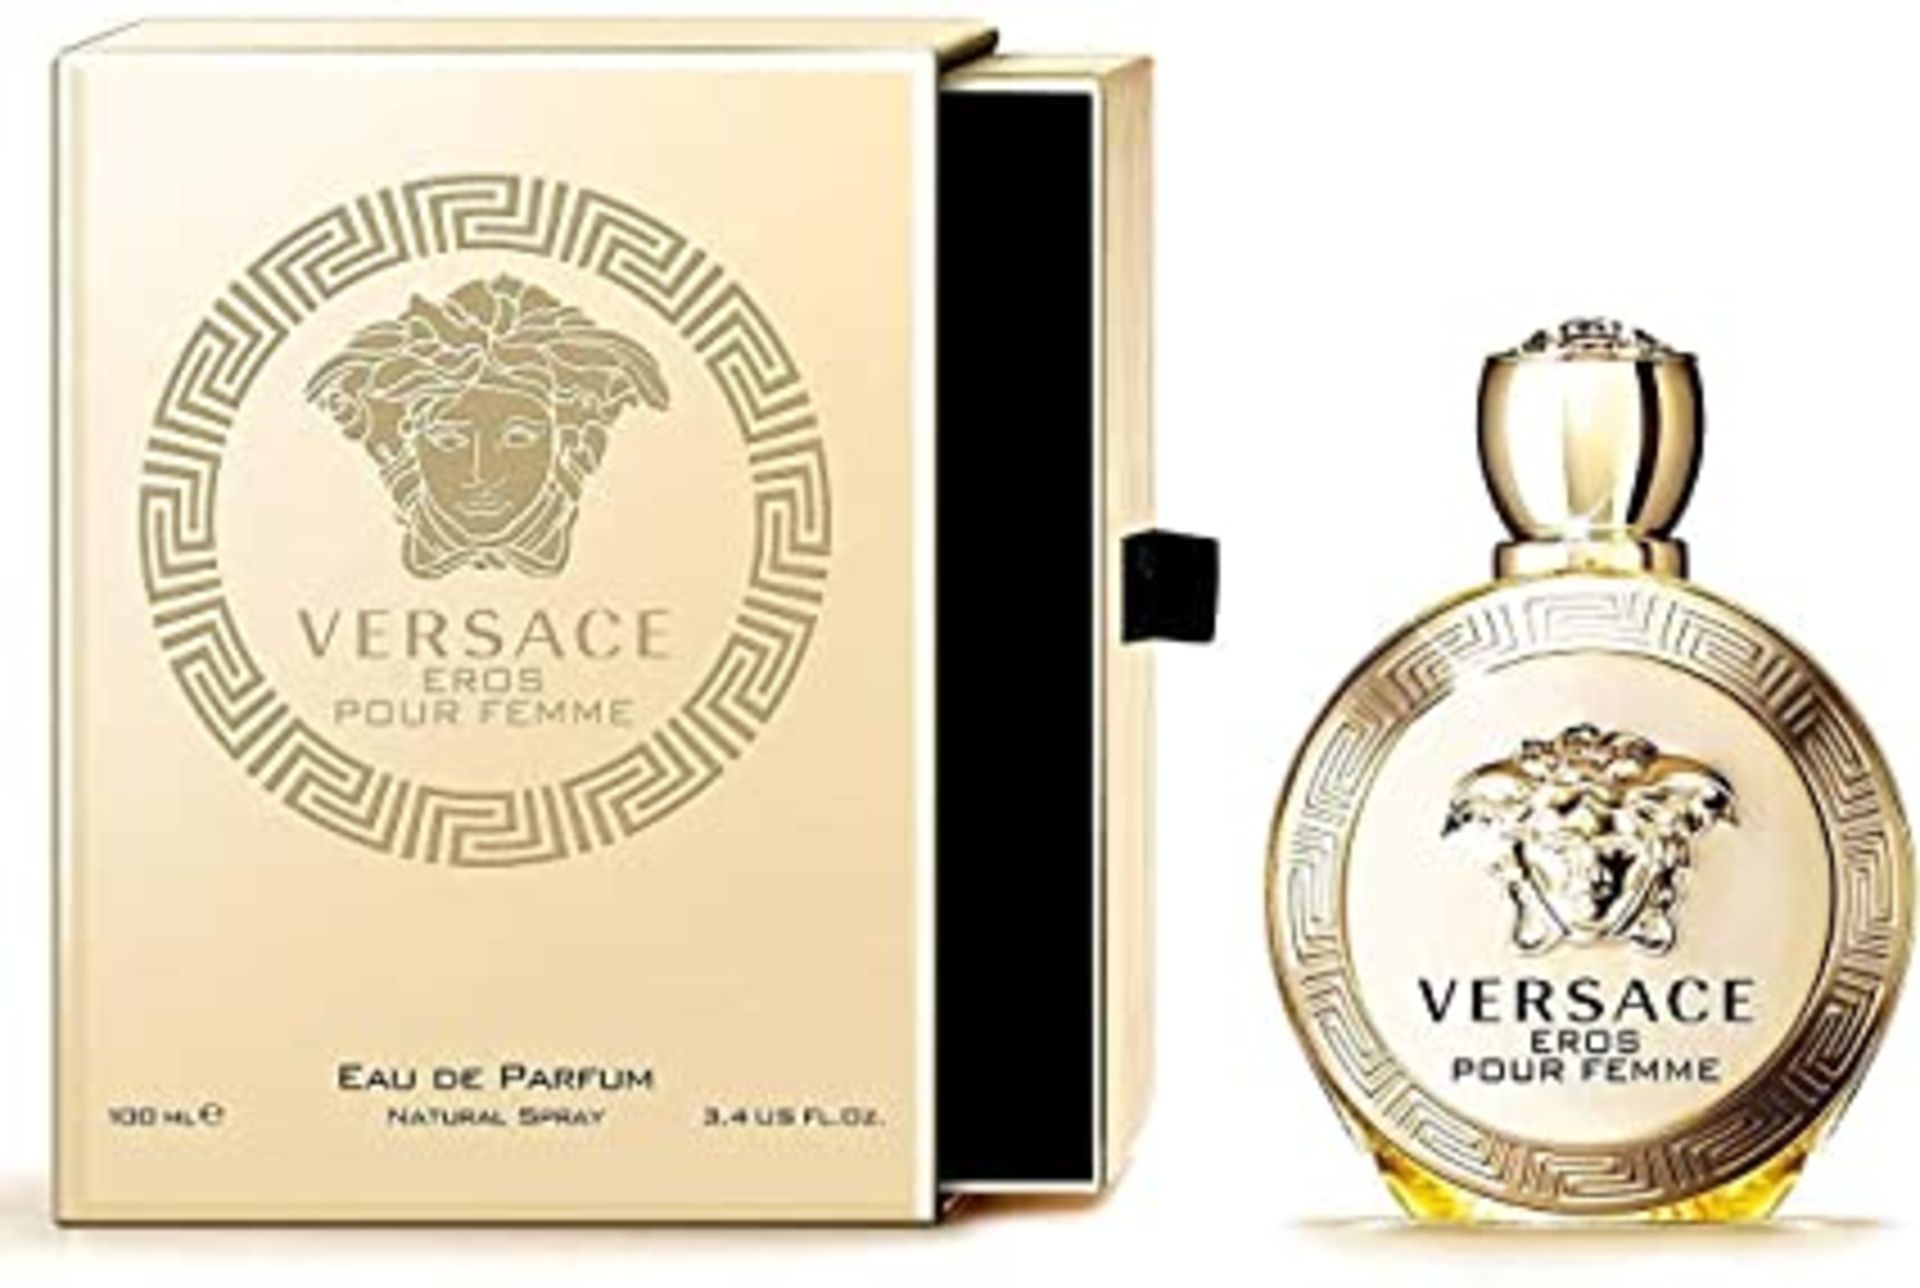 BRAND NEW VERSACE POUR FEMMA EDP 100ML RRP £50Condition ReportBRAND NEW